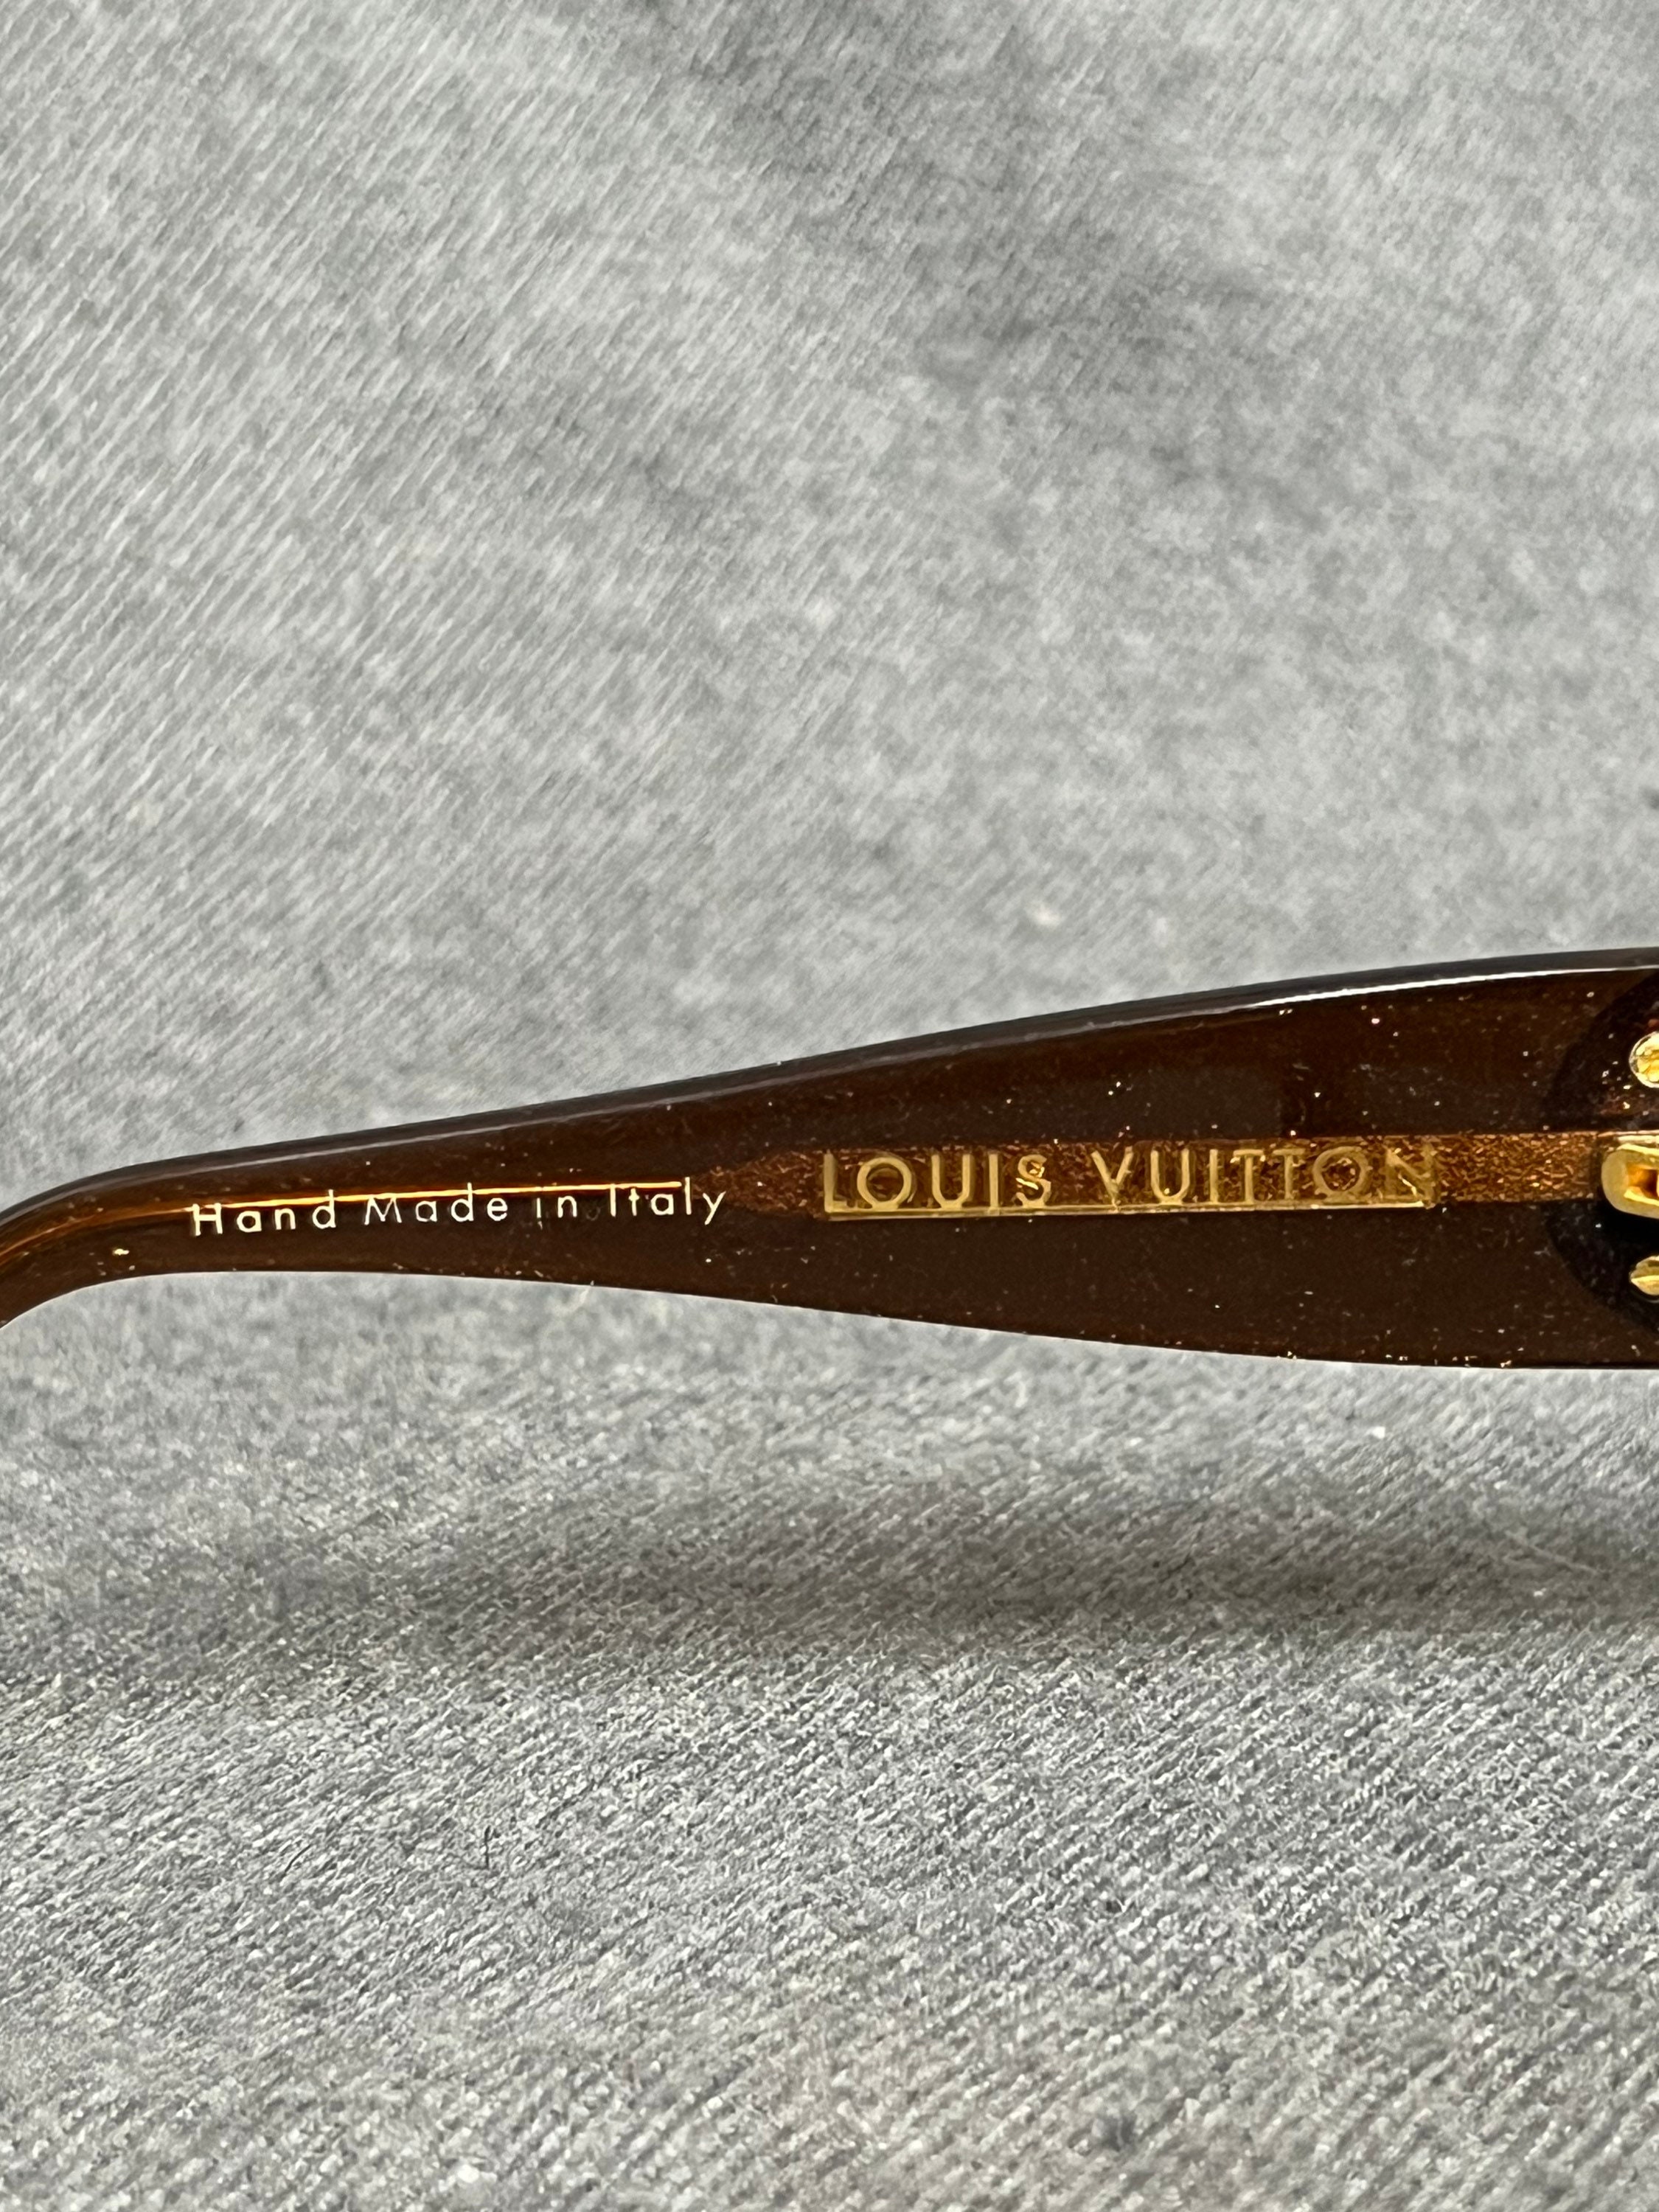 Vintage Louis Vuitton - any help with ID? : r/sunglasses